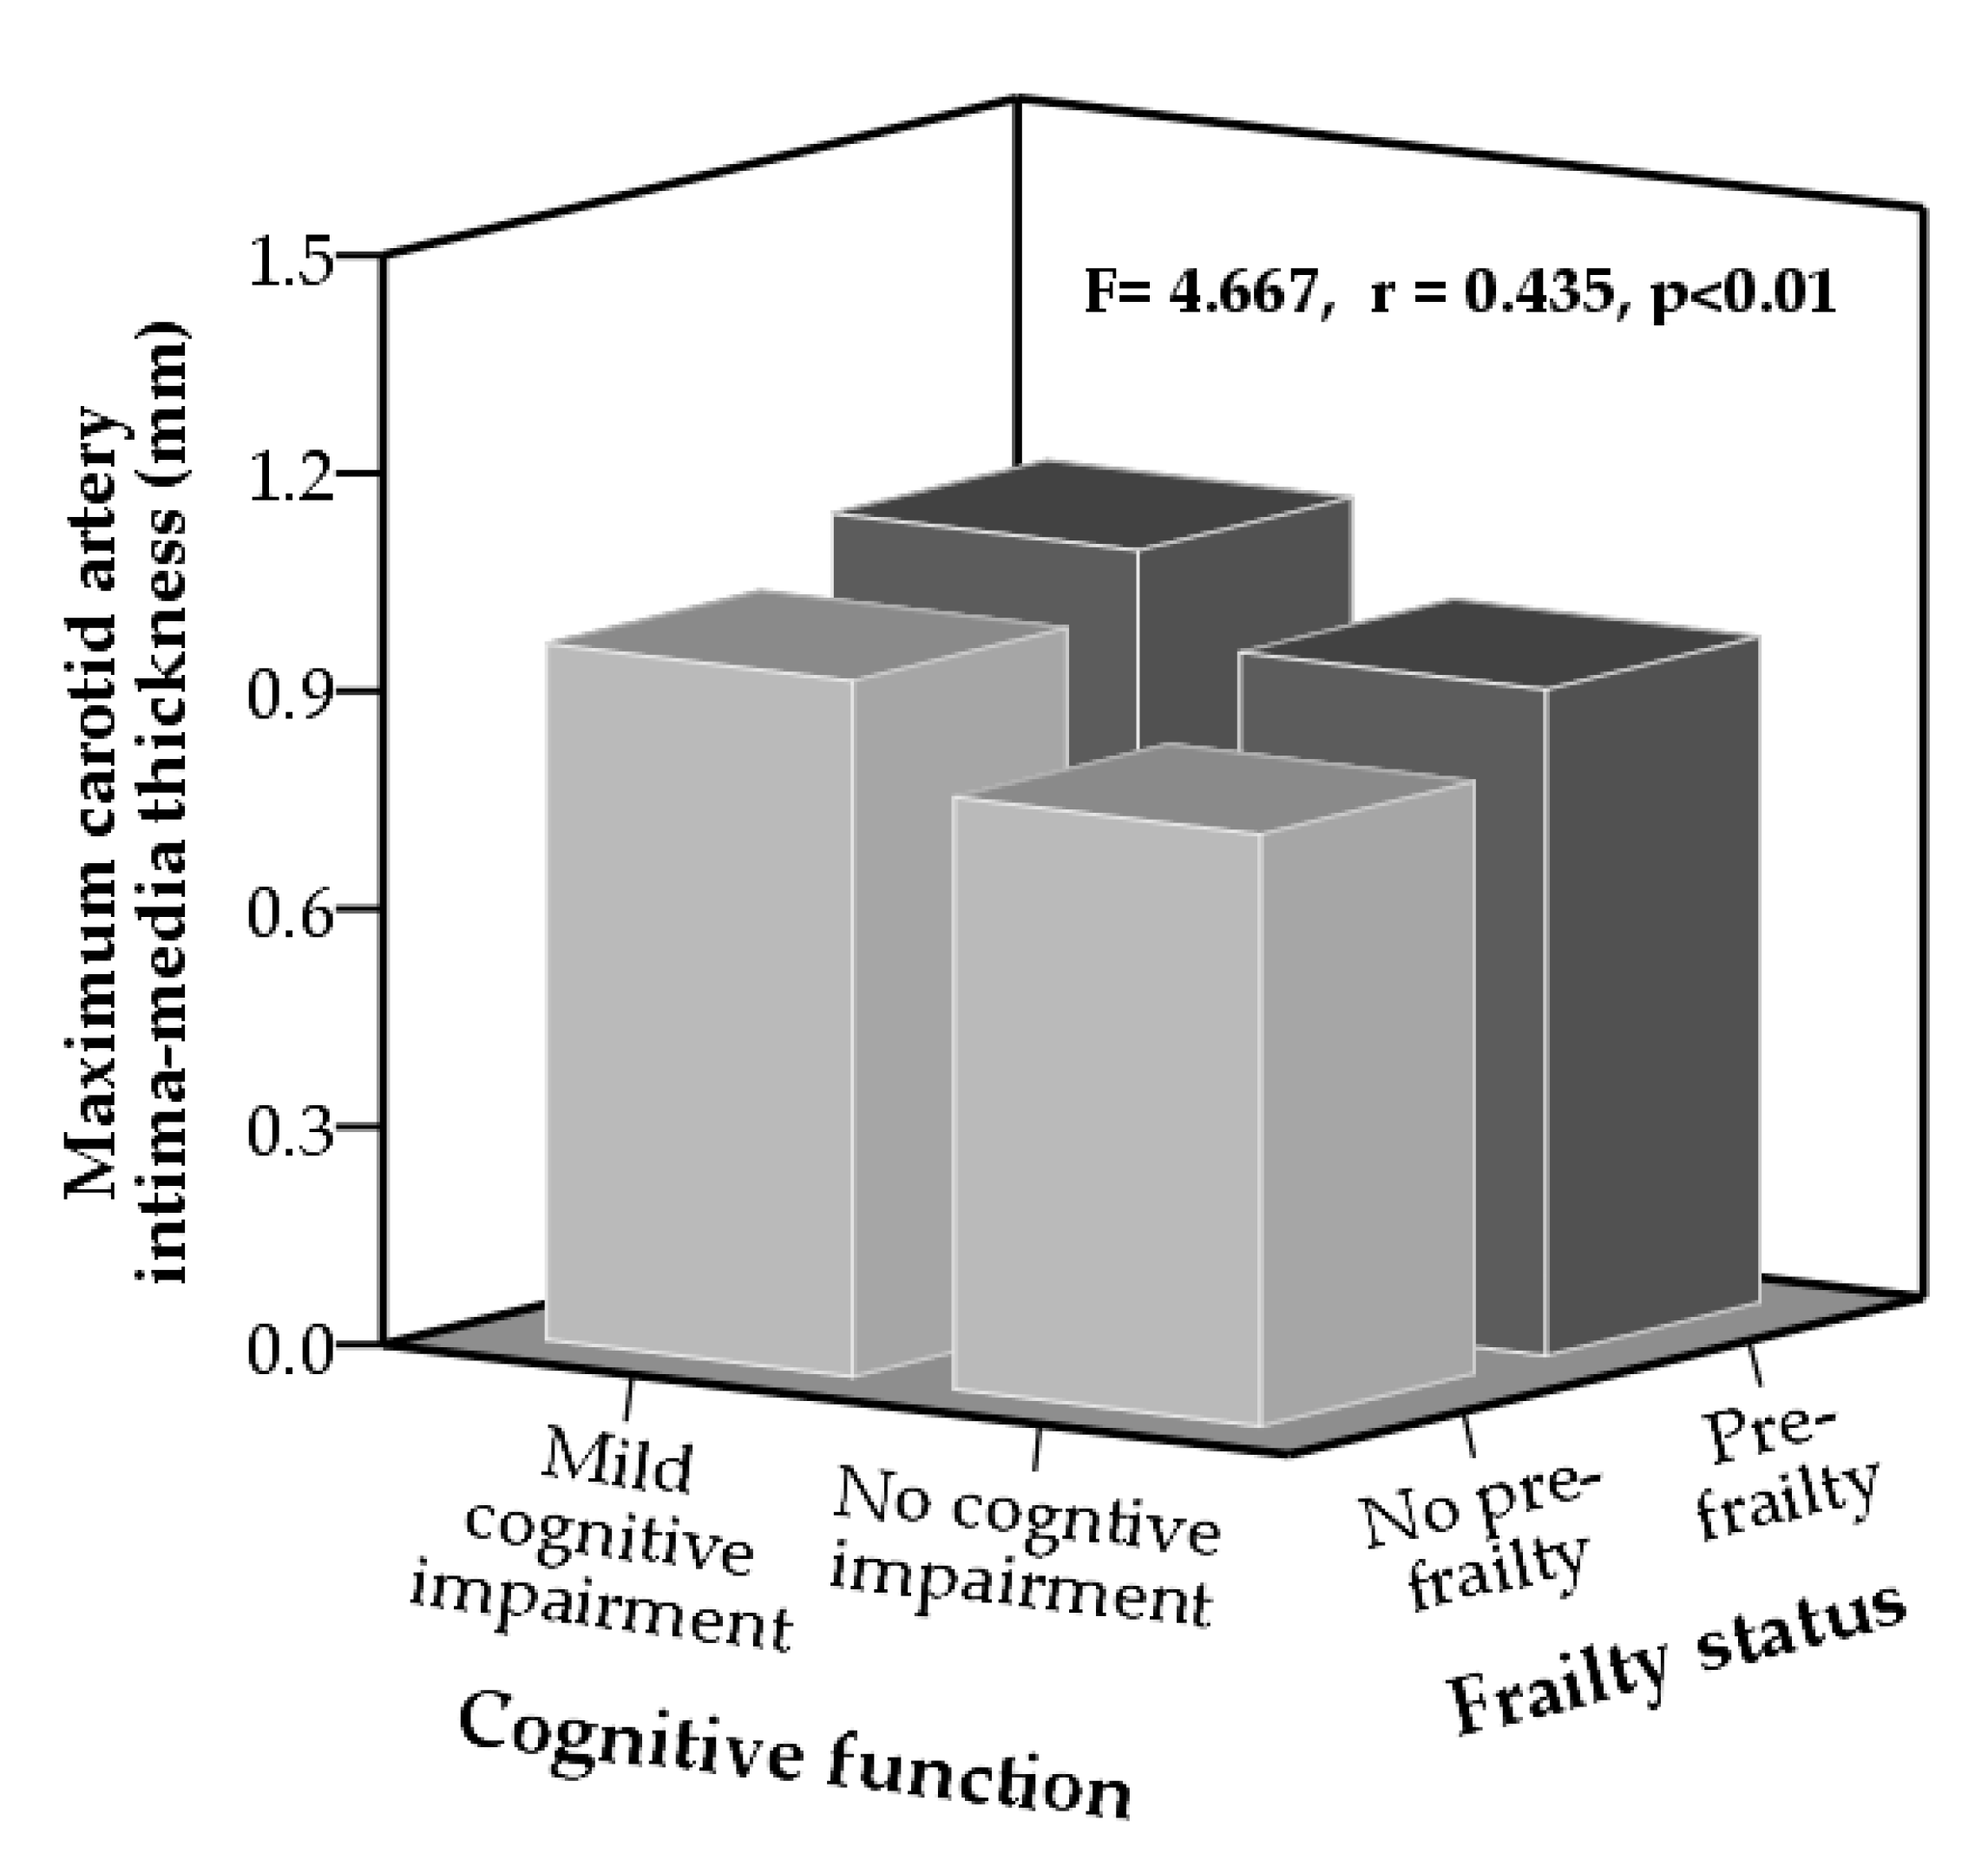 IJERPH | Free Full-Text | Association Between Carotid Artery Intima-Media  Thickness and Combinations of Mild Cognitive Impairment and Pre-Frailty in  Older Adults